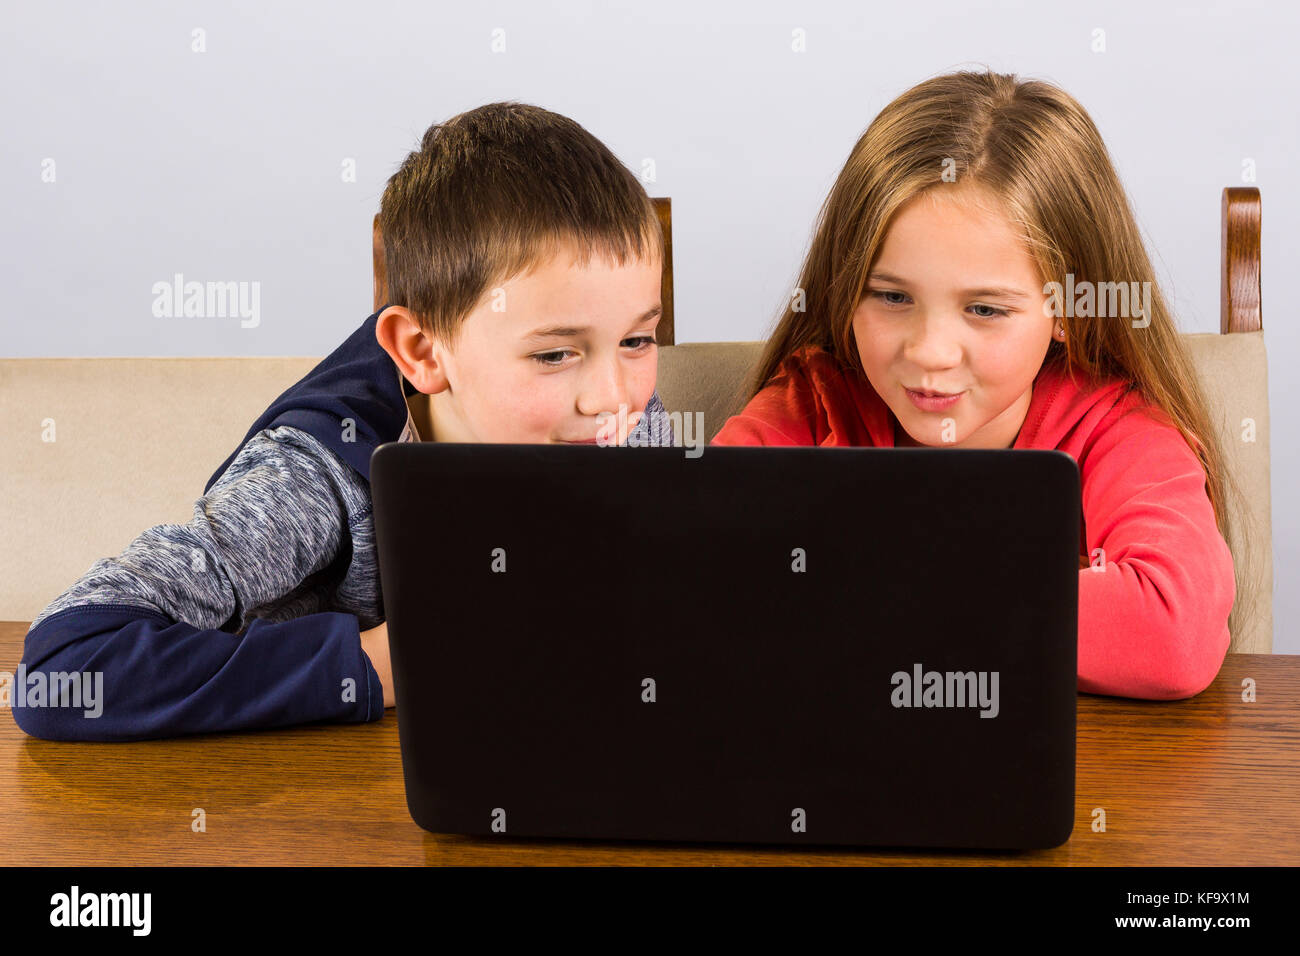 Little boy and girl having fun on a laptop computer Stock Photo